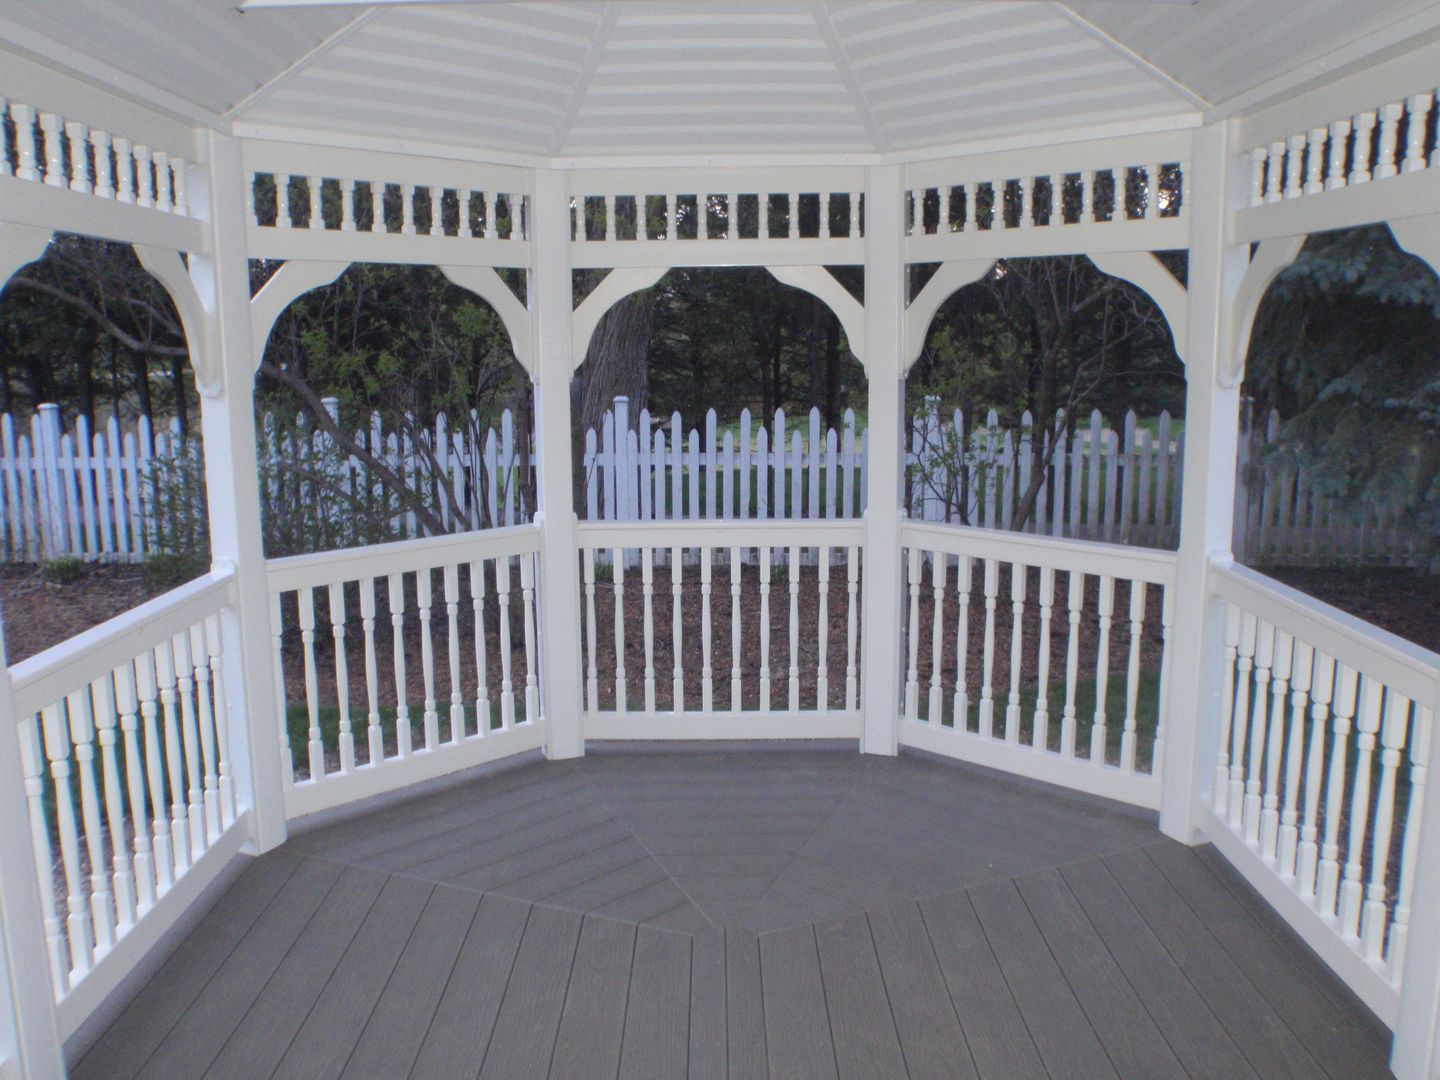 10 by 14 foot wooden oval gazebo with wooden flooring